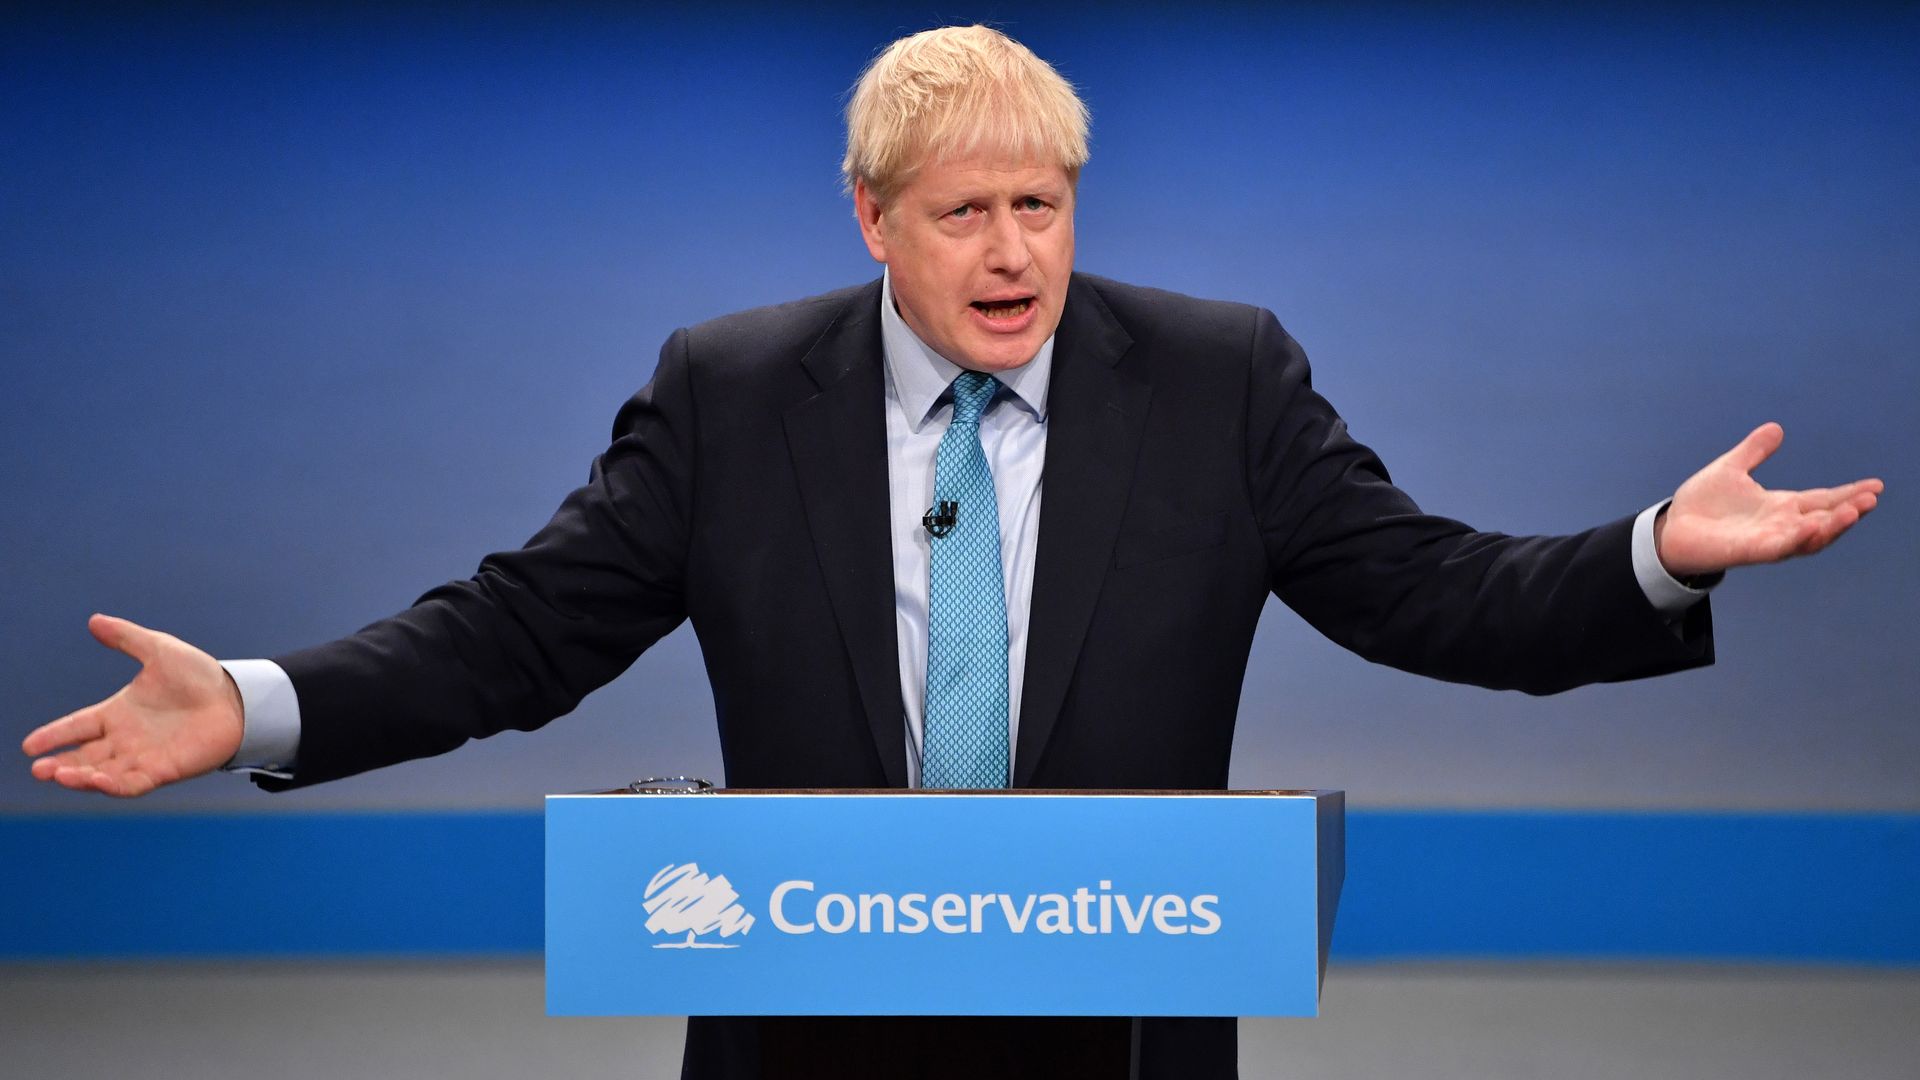 Britain's Prime Minister Boris Johnson delivers his keynote speechat the annual Conservative Party conference in Manchester, north-west England on October 2